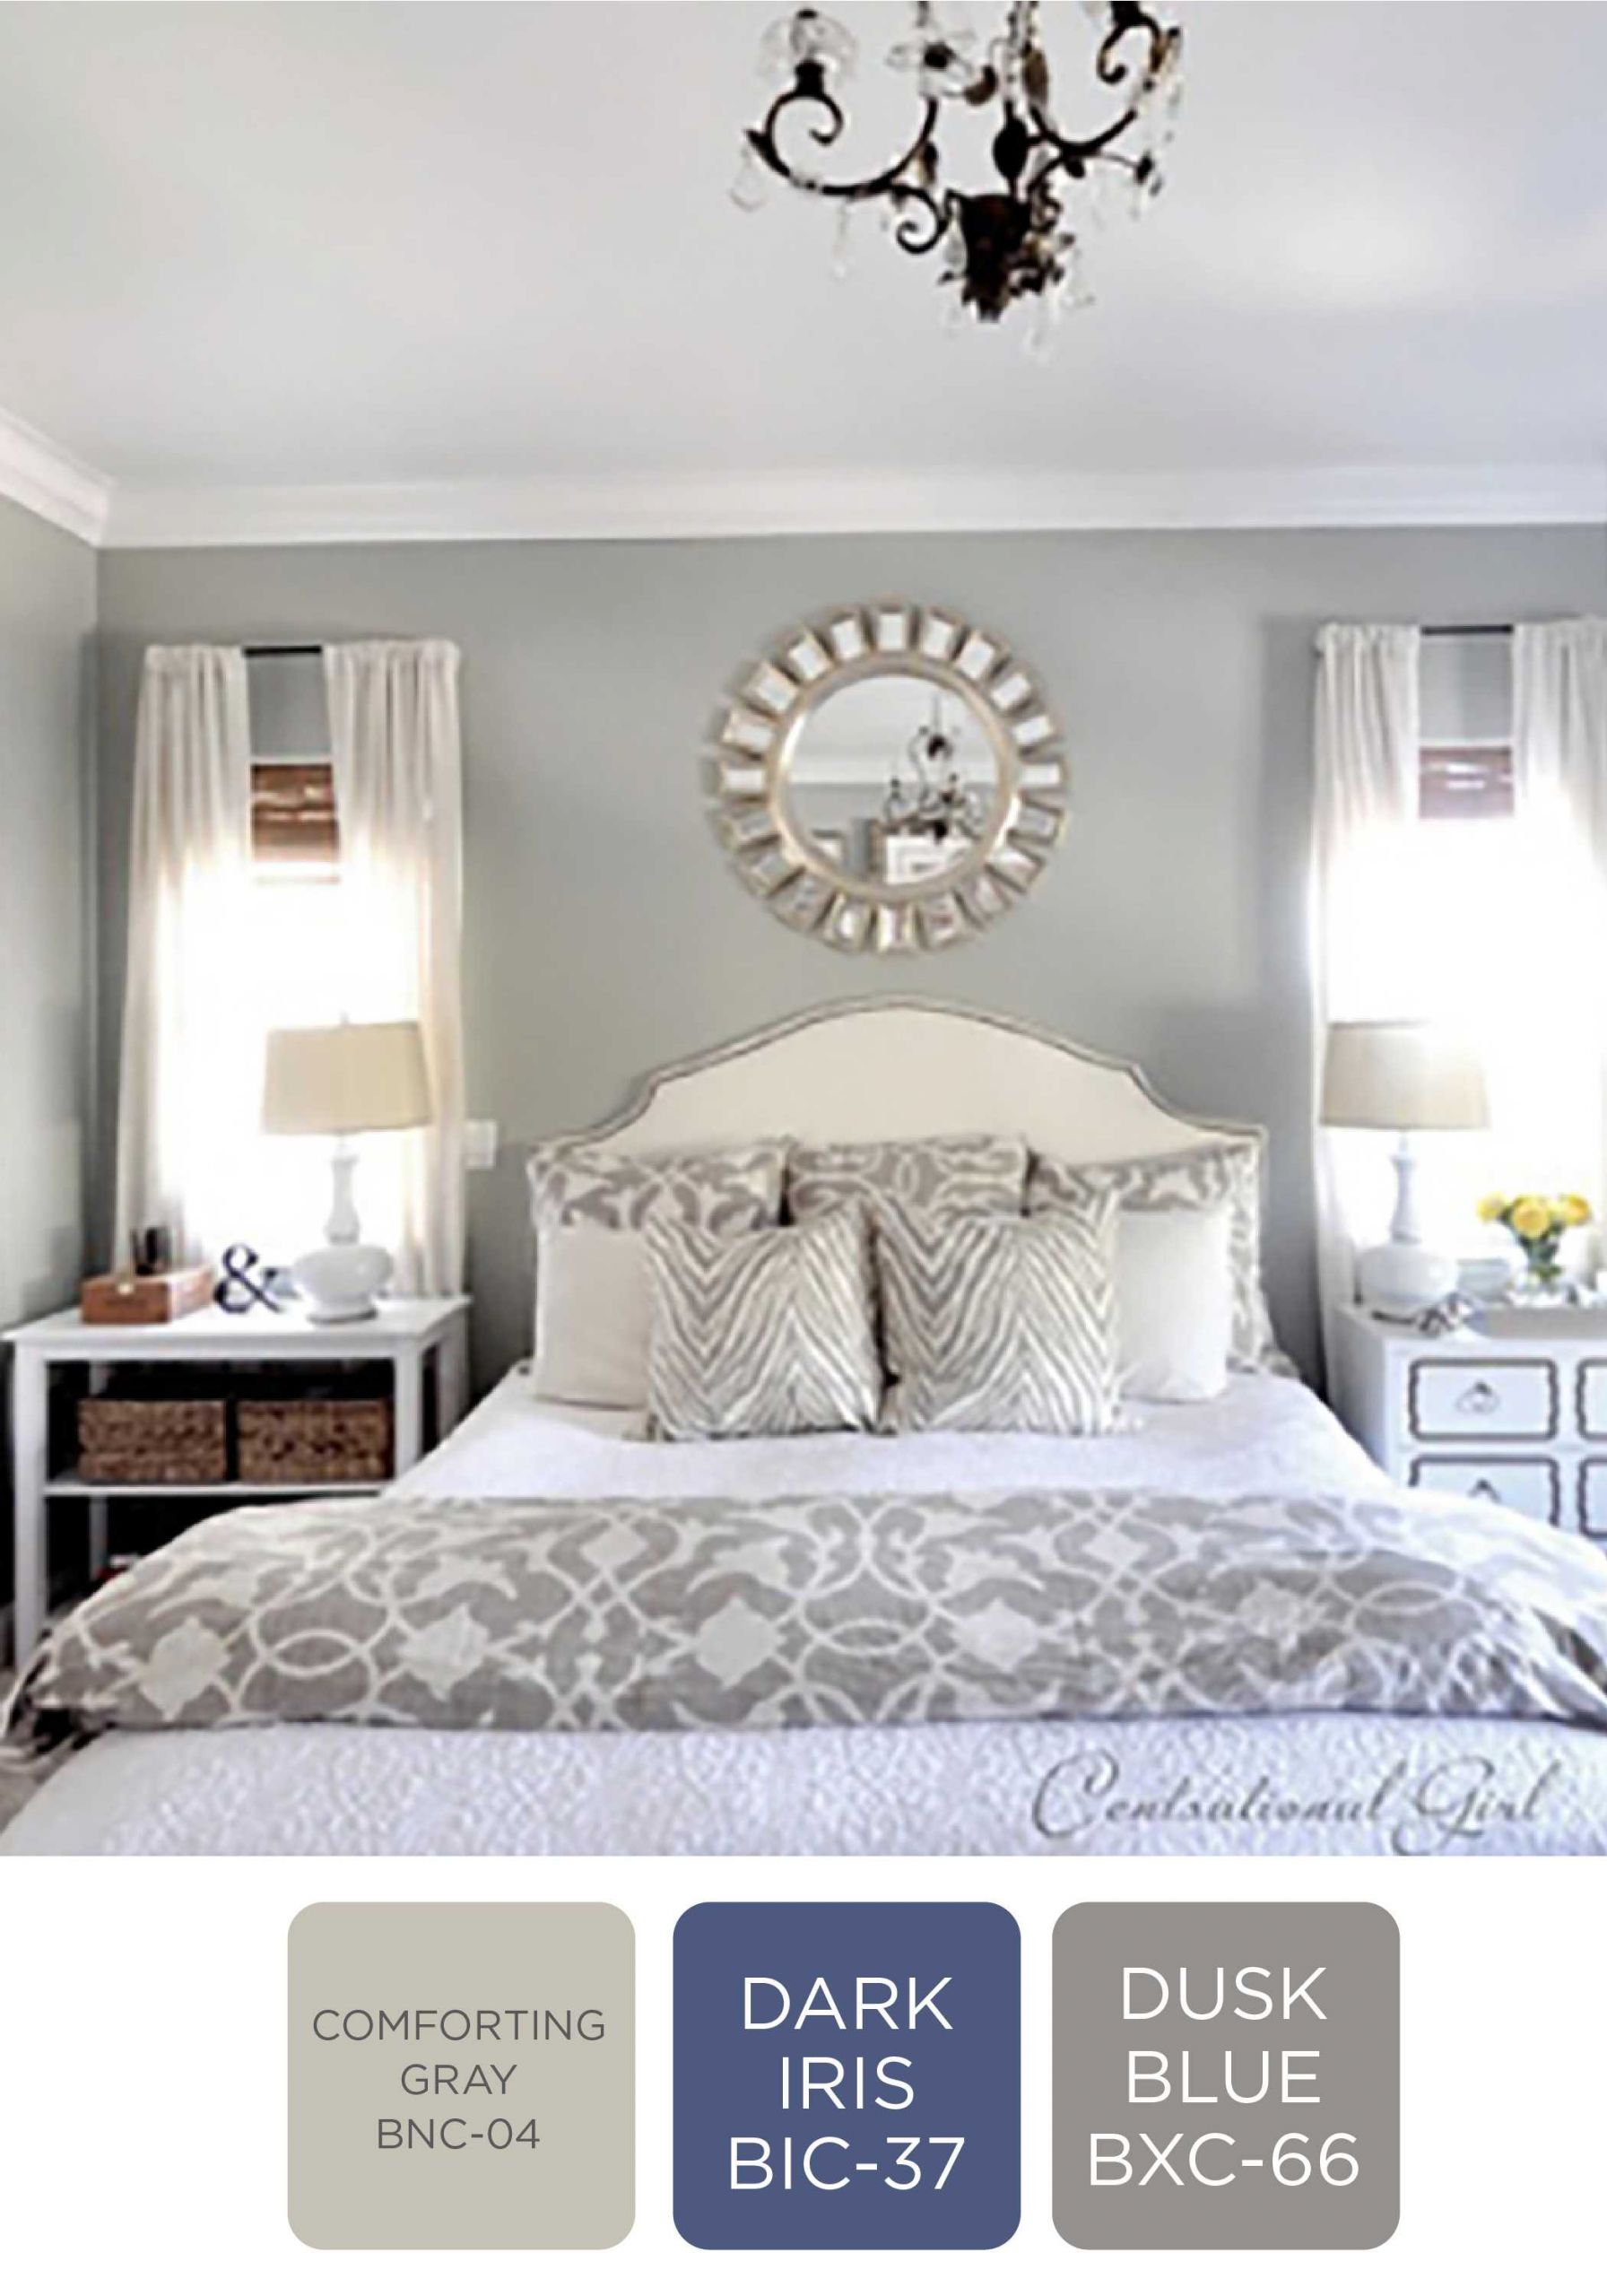 Behr Bedroom Paint Colors
 Six Bedrooms Color Choice Affects Your Mood